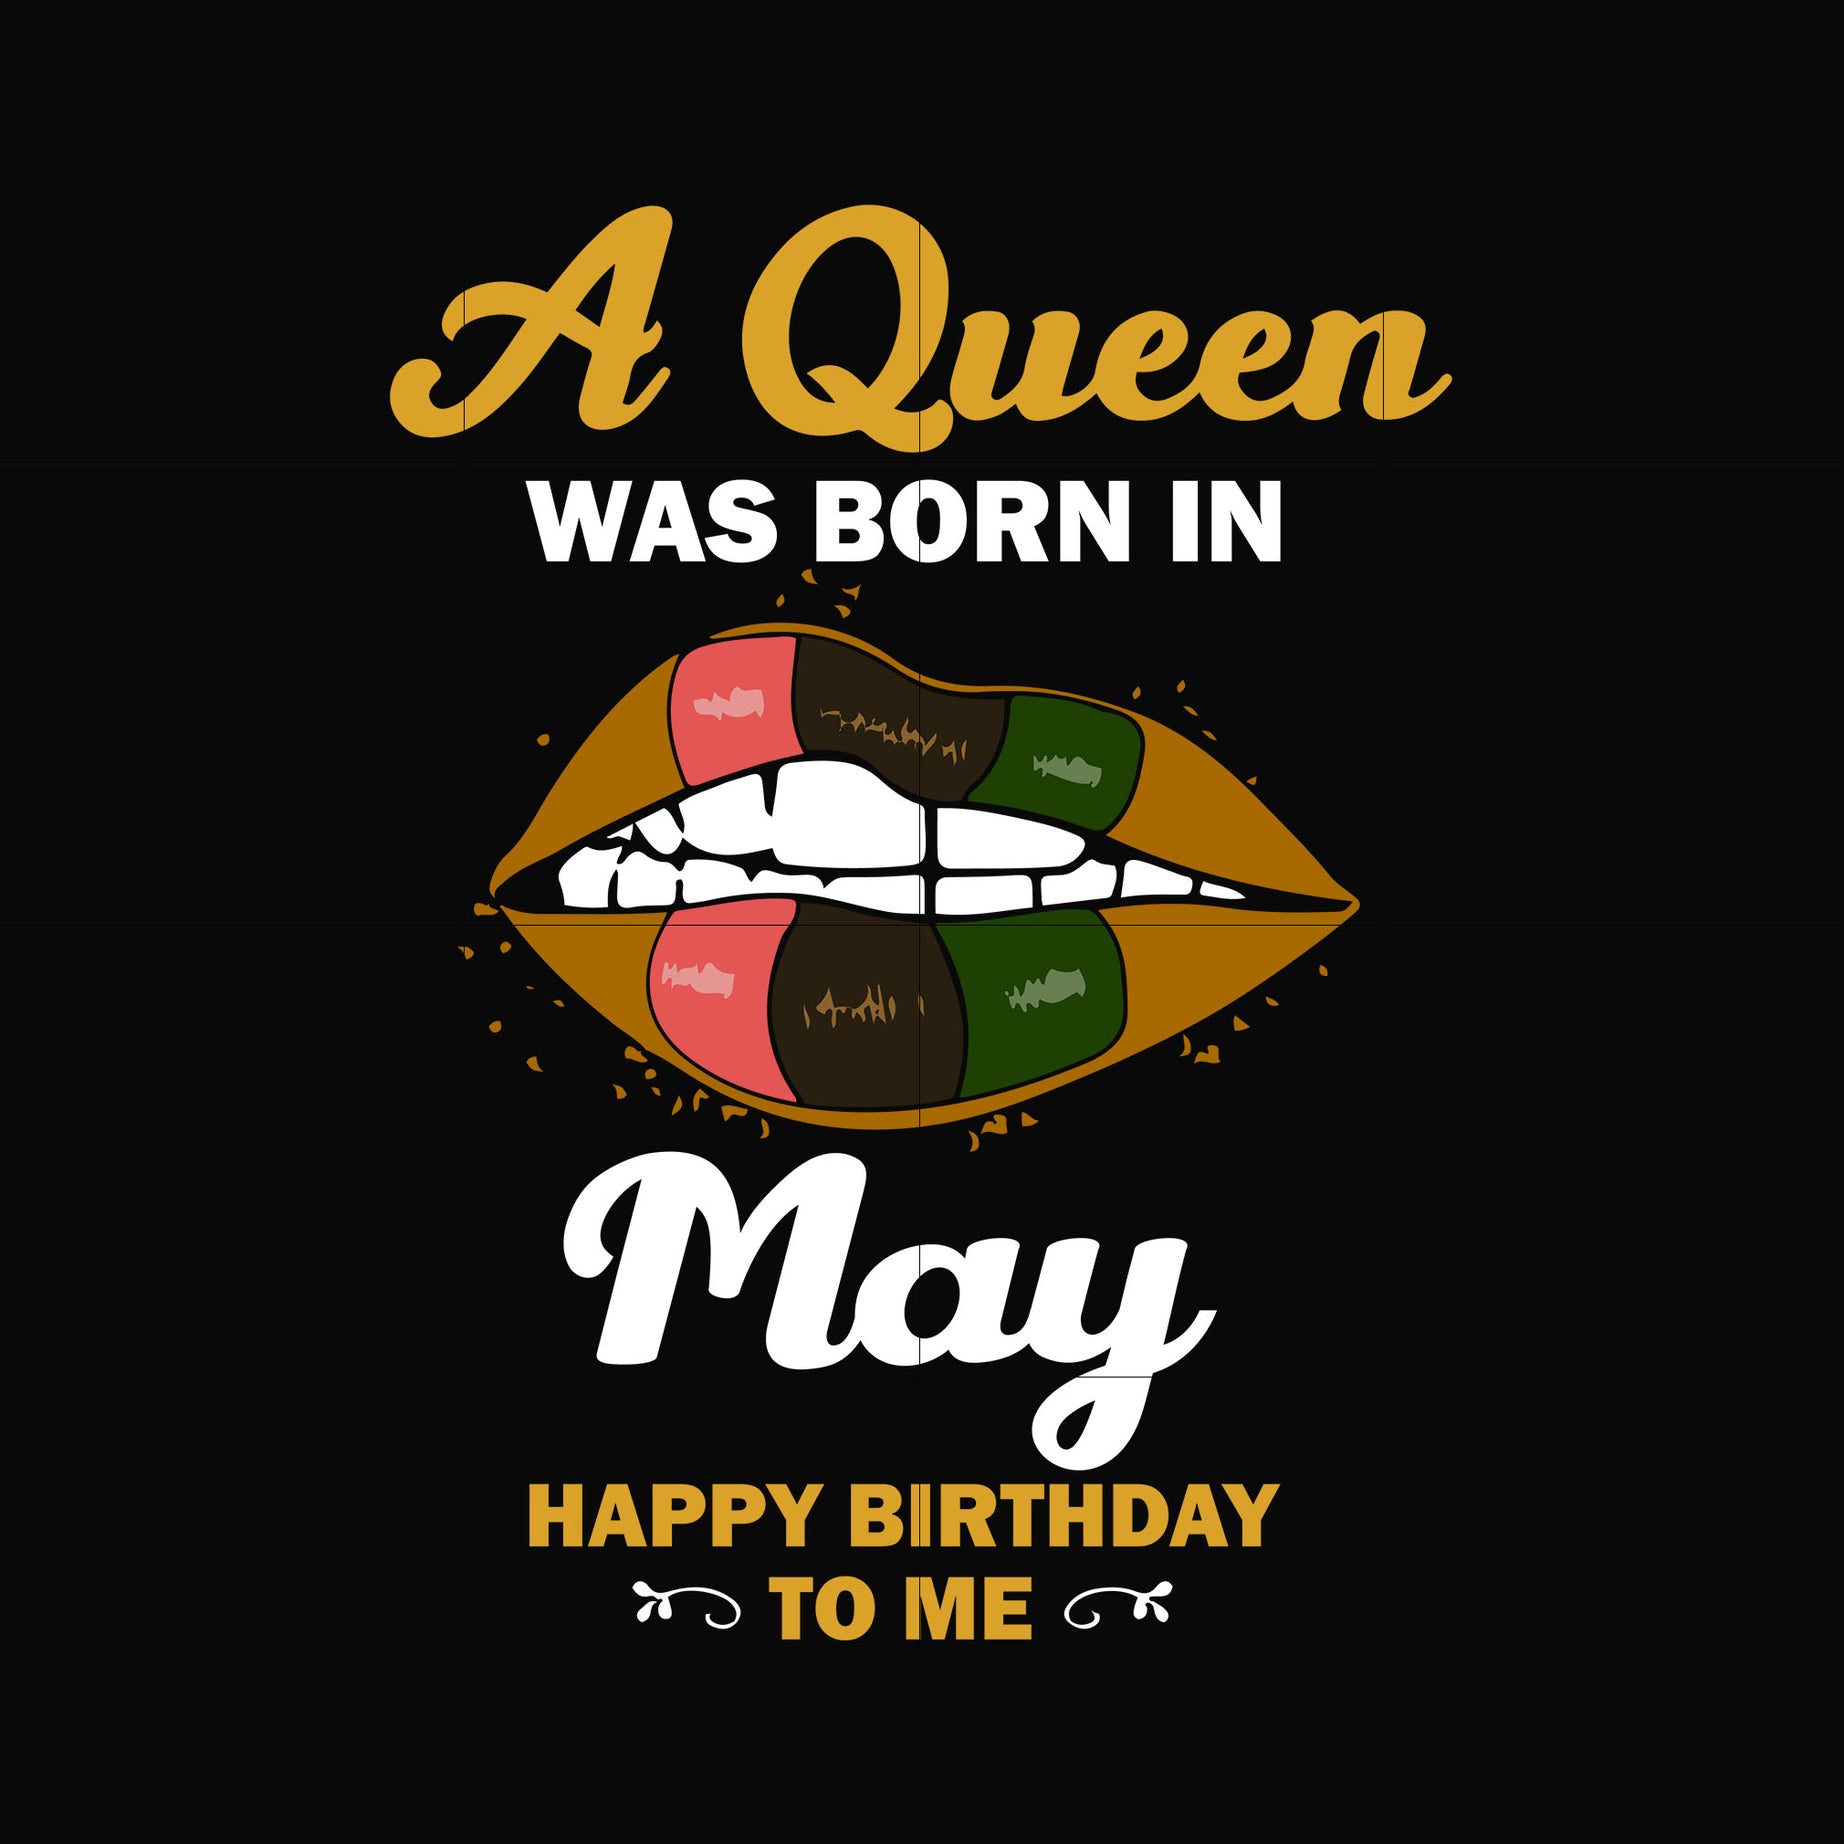 A queen was born in May happy birthday to me svg, png, dxf, eps digital file BD0126